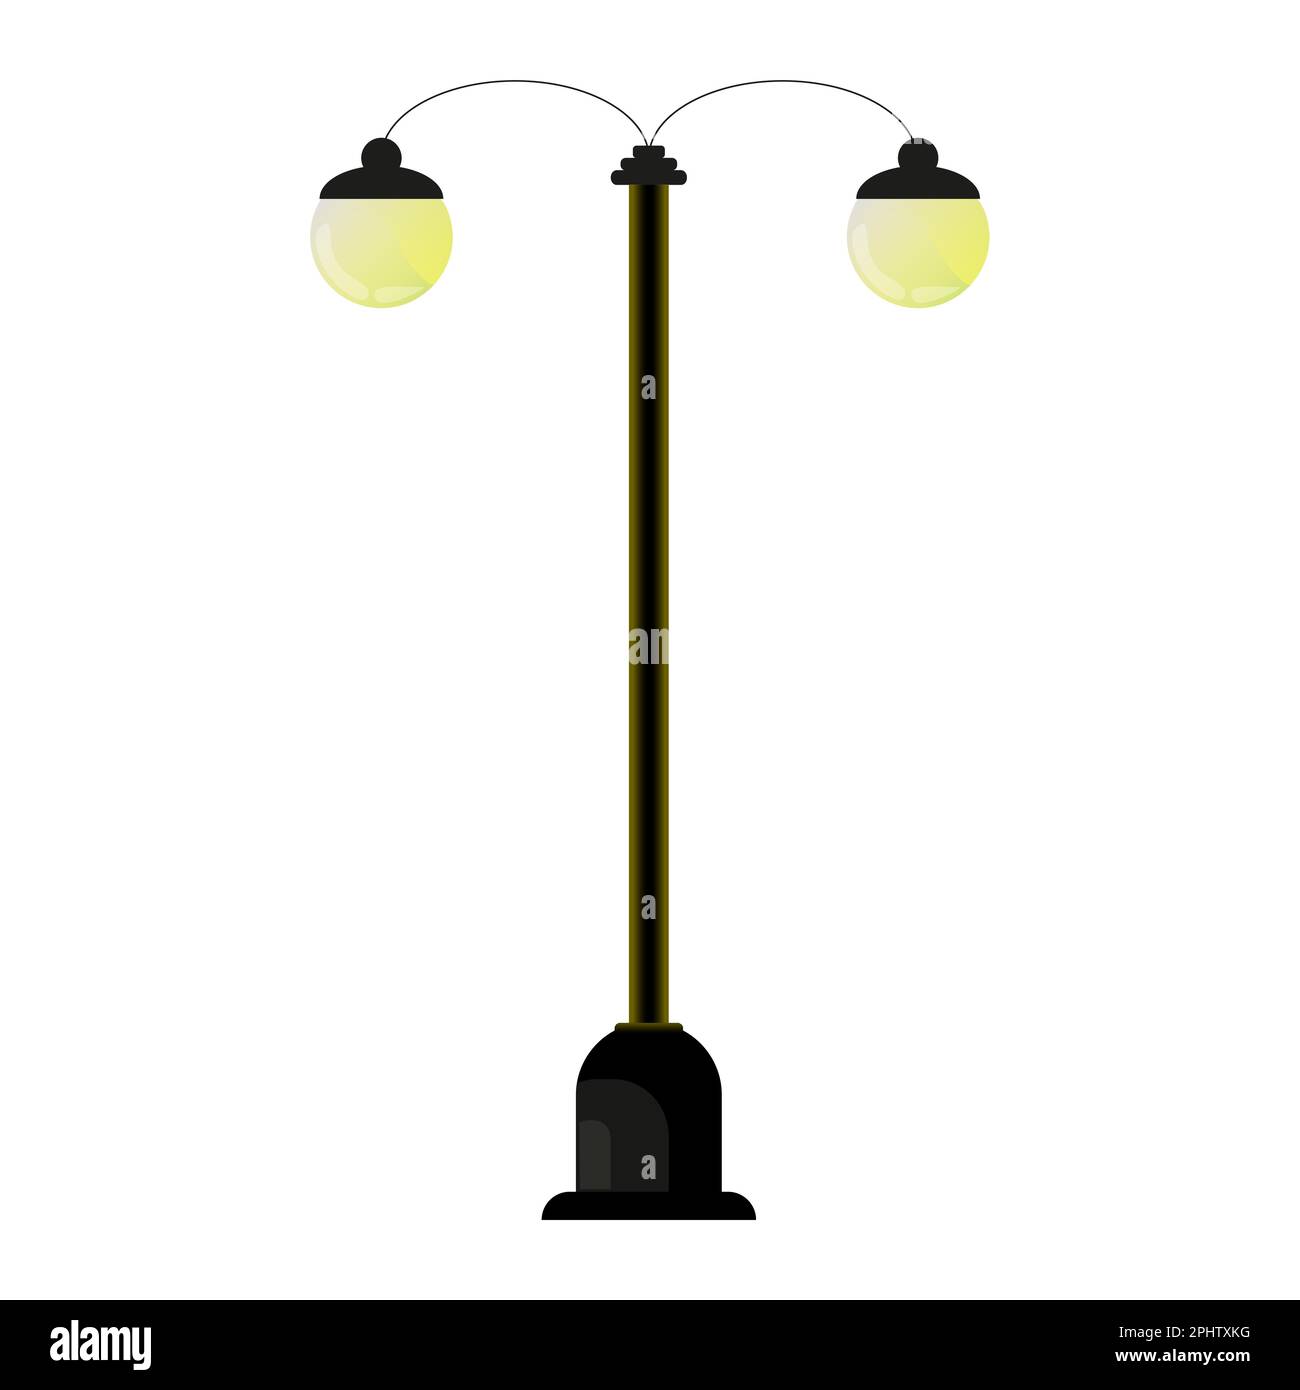 Streetlamp in night in cartoon style. Urban road lights. Classic park street lamppost. Colorful vector illustration isolated on white background. Stock Vector